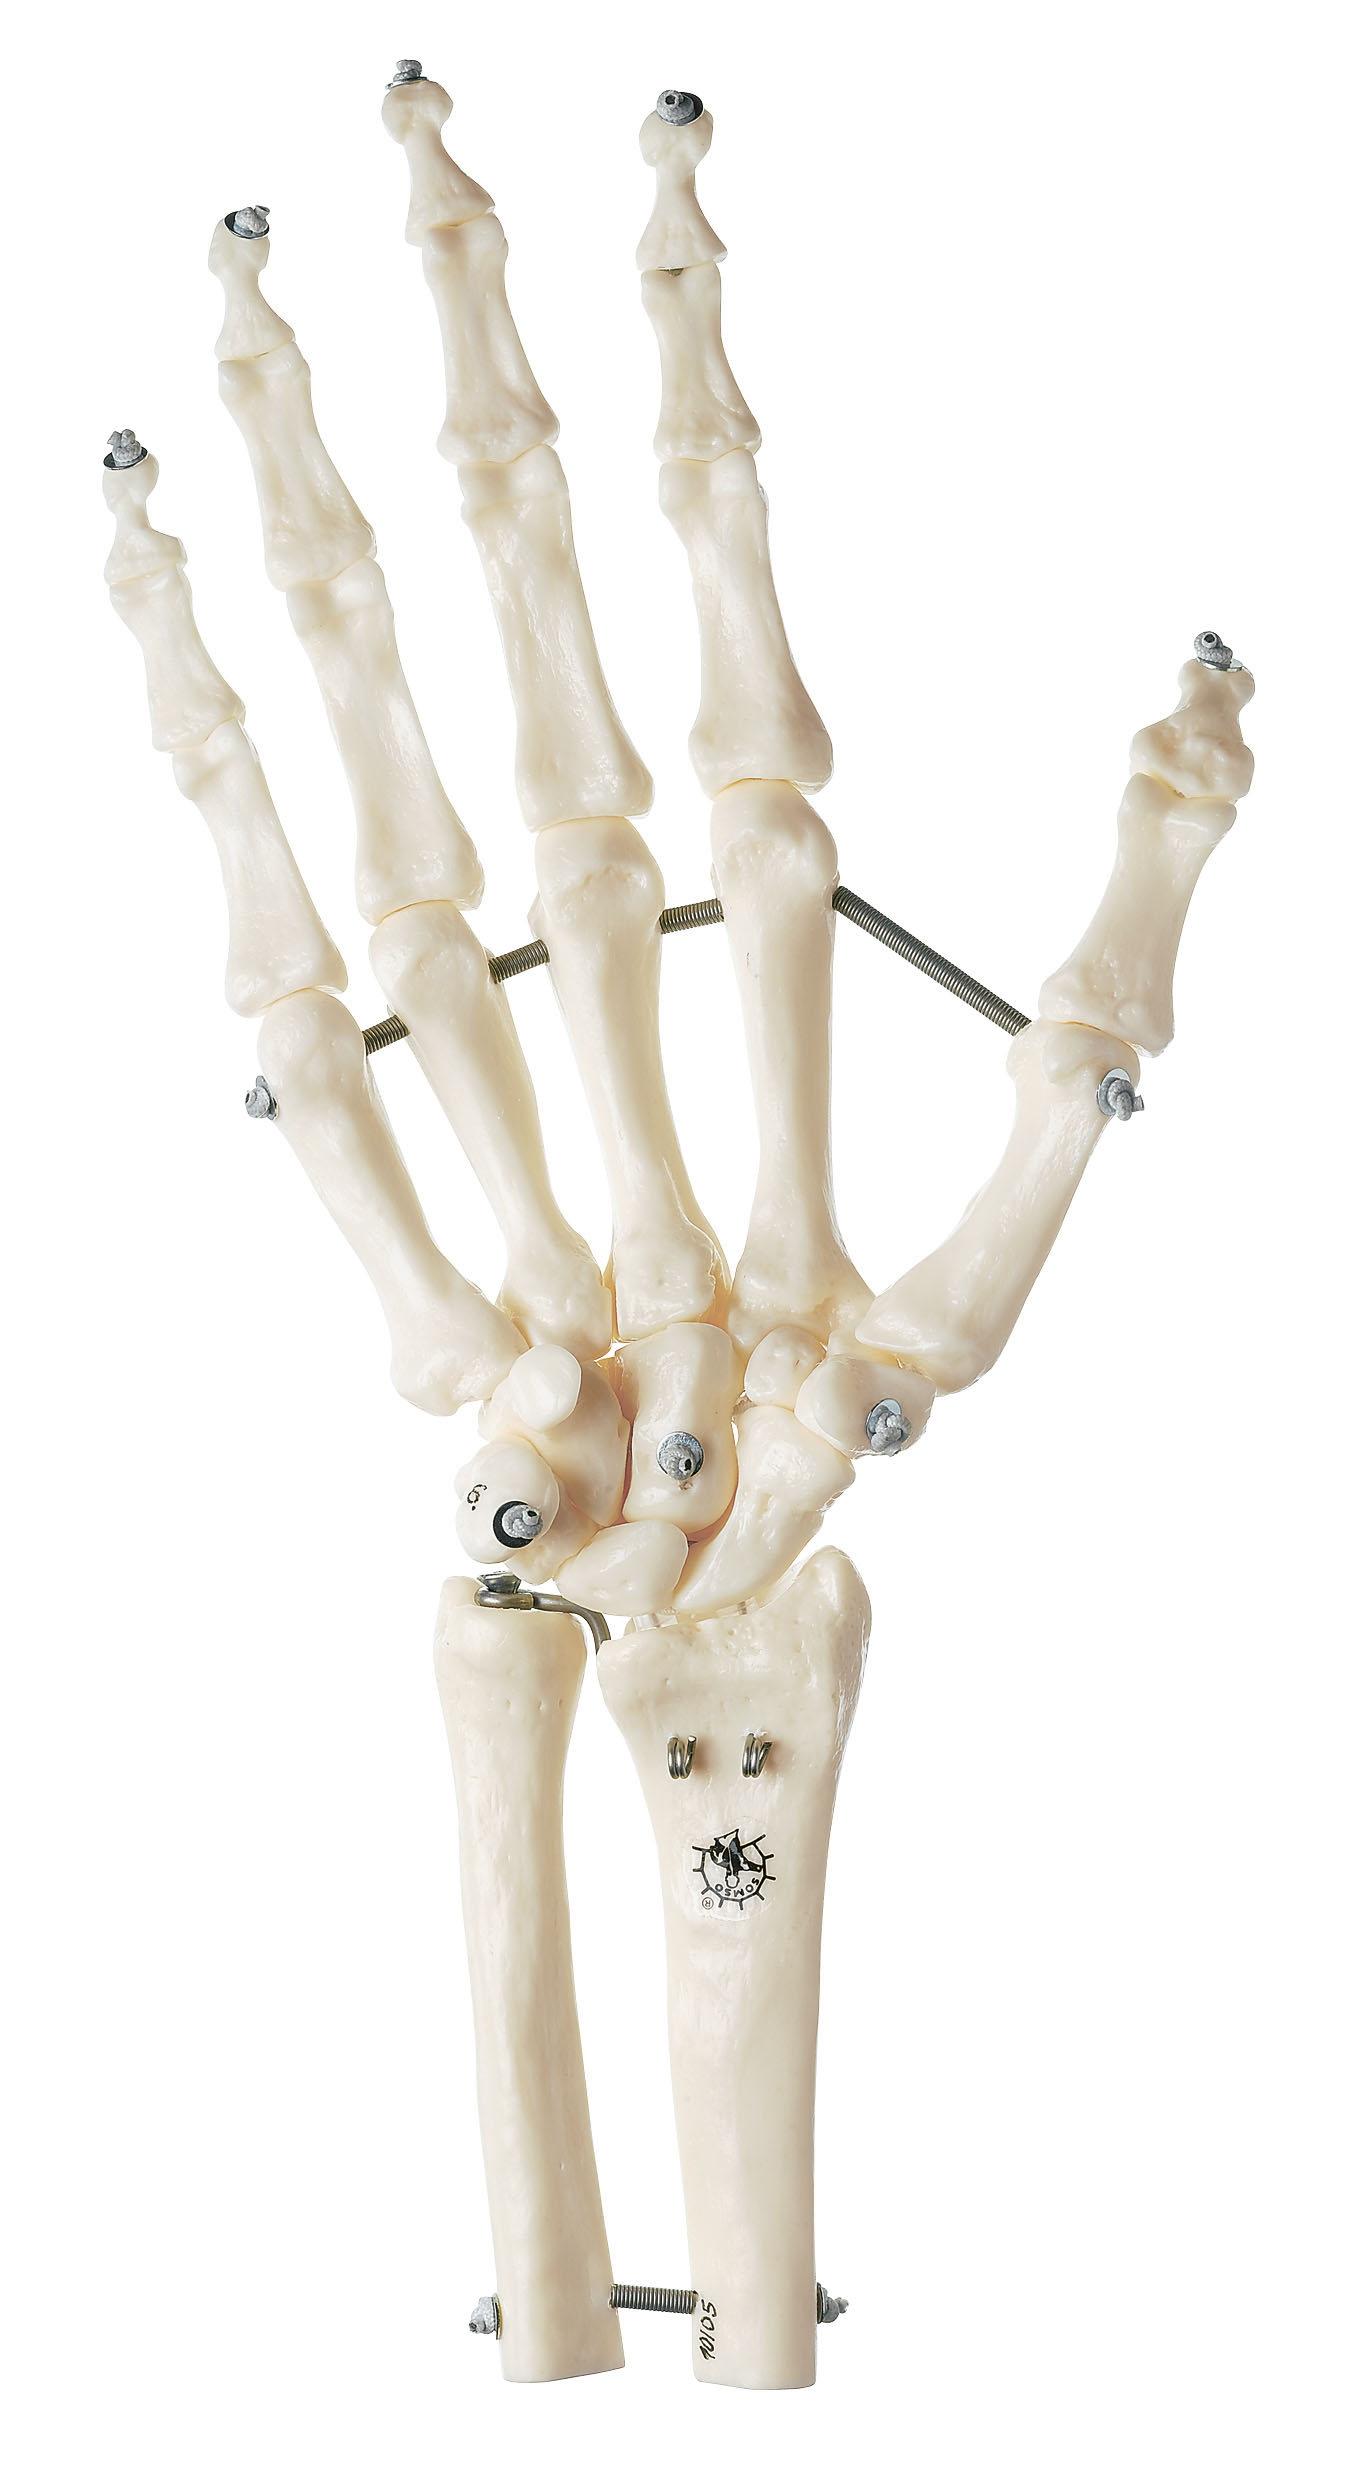 Skeleton of the Hand With Base of Forearm (Flexible Mounting)